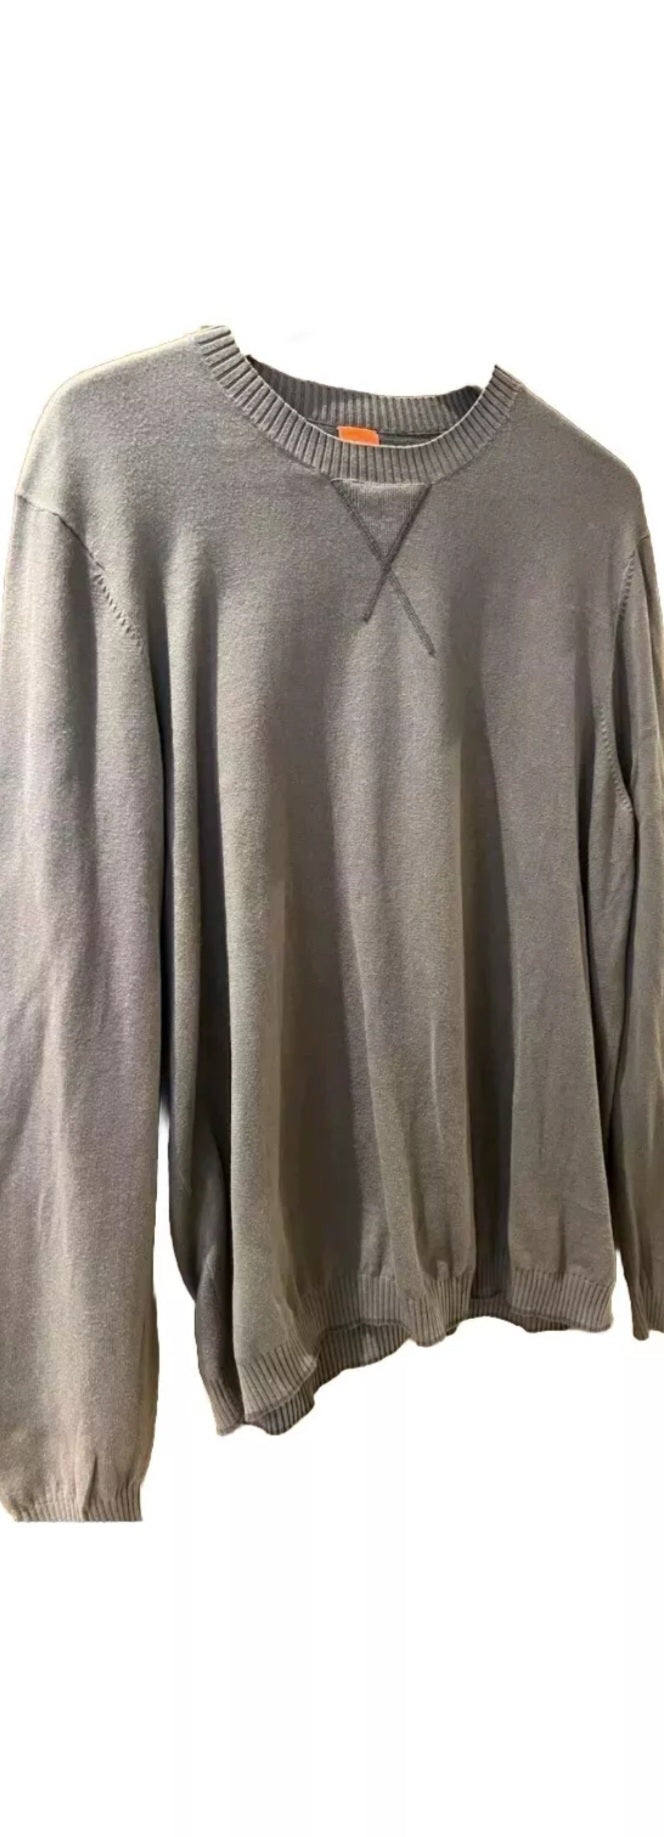 Hugo boss over sized gym cardigans up oversized. Fit all